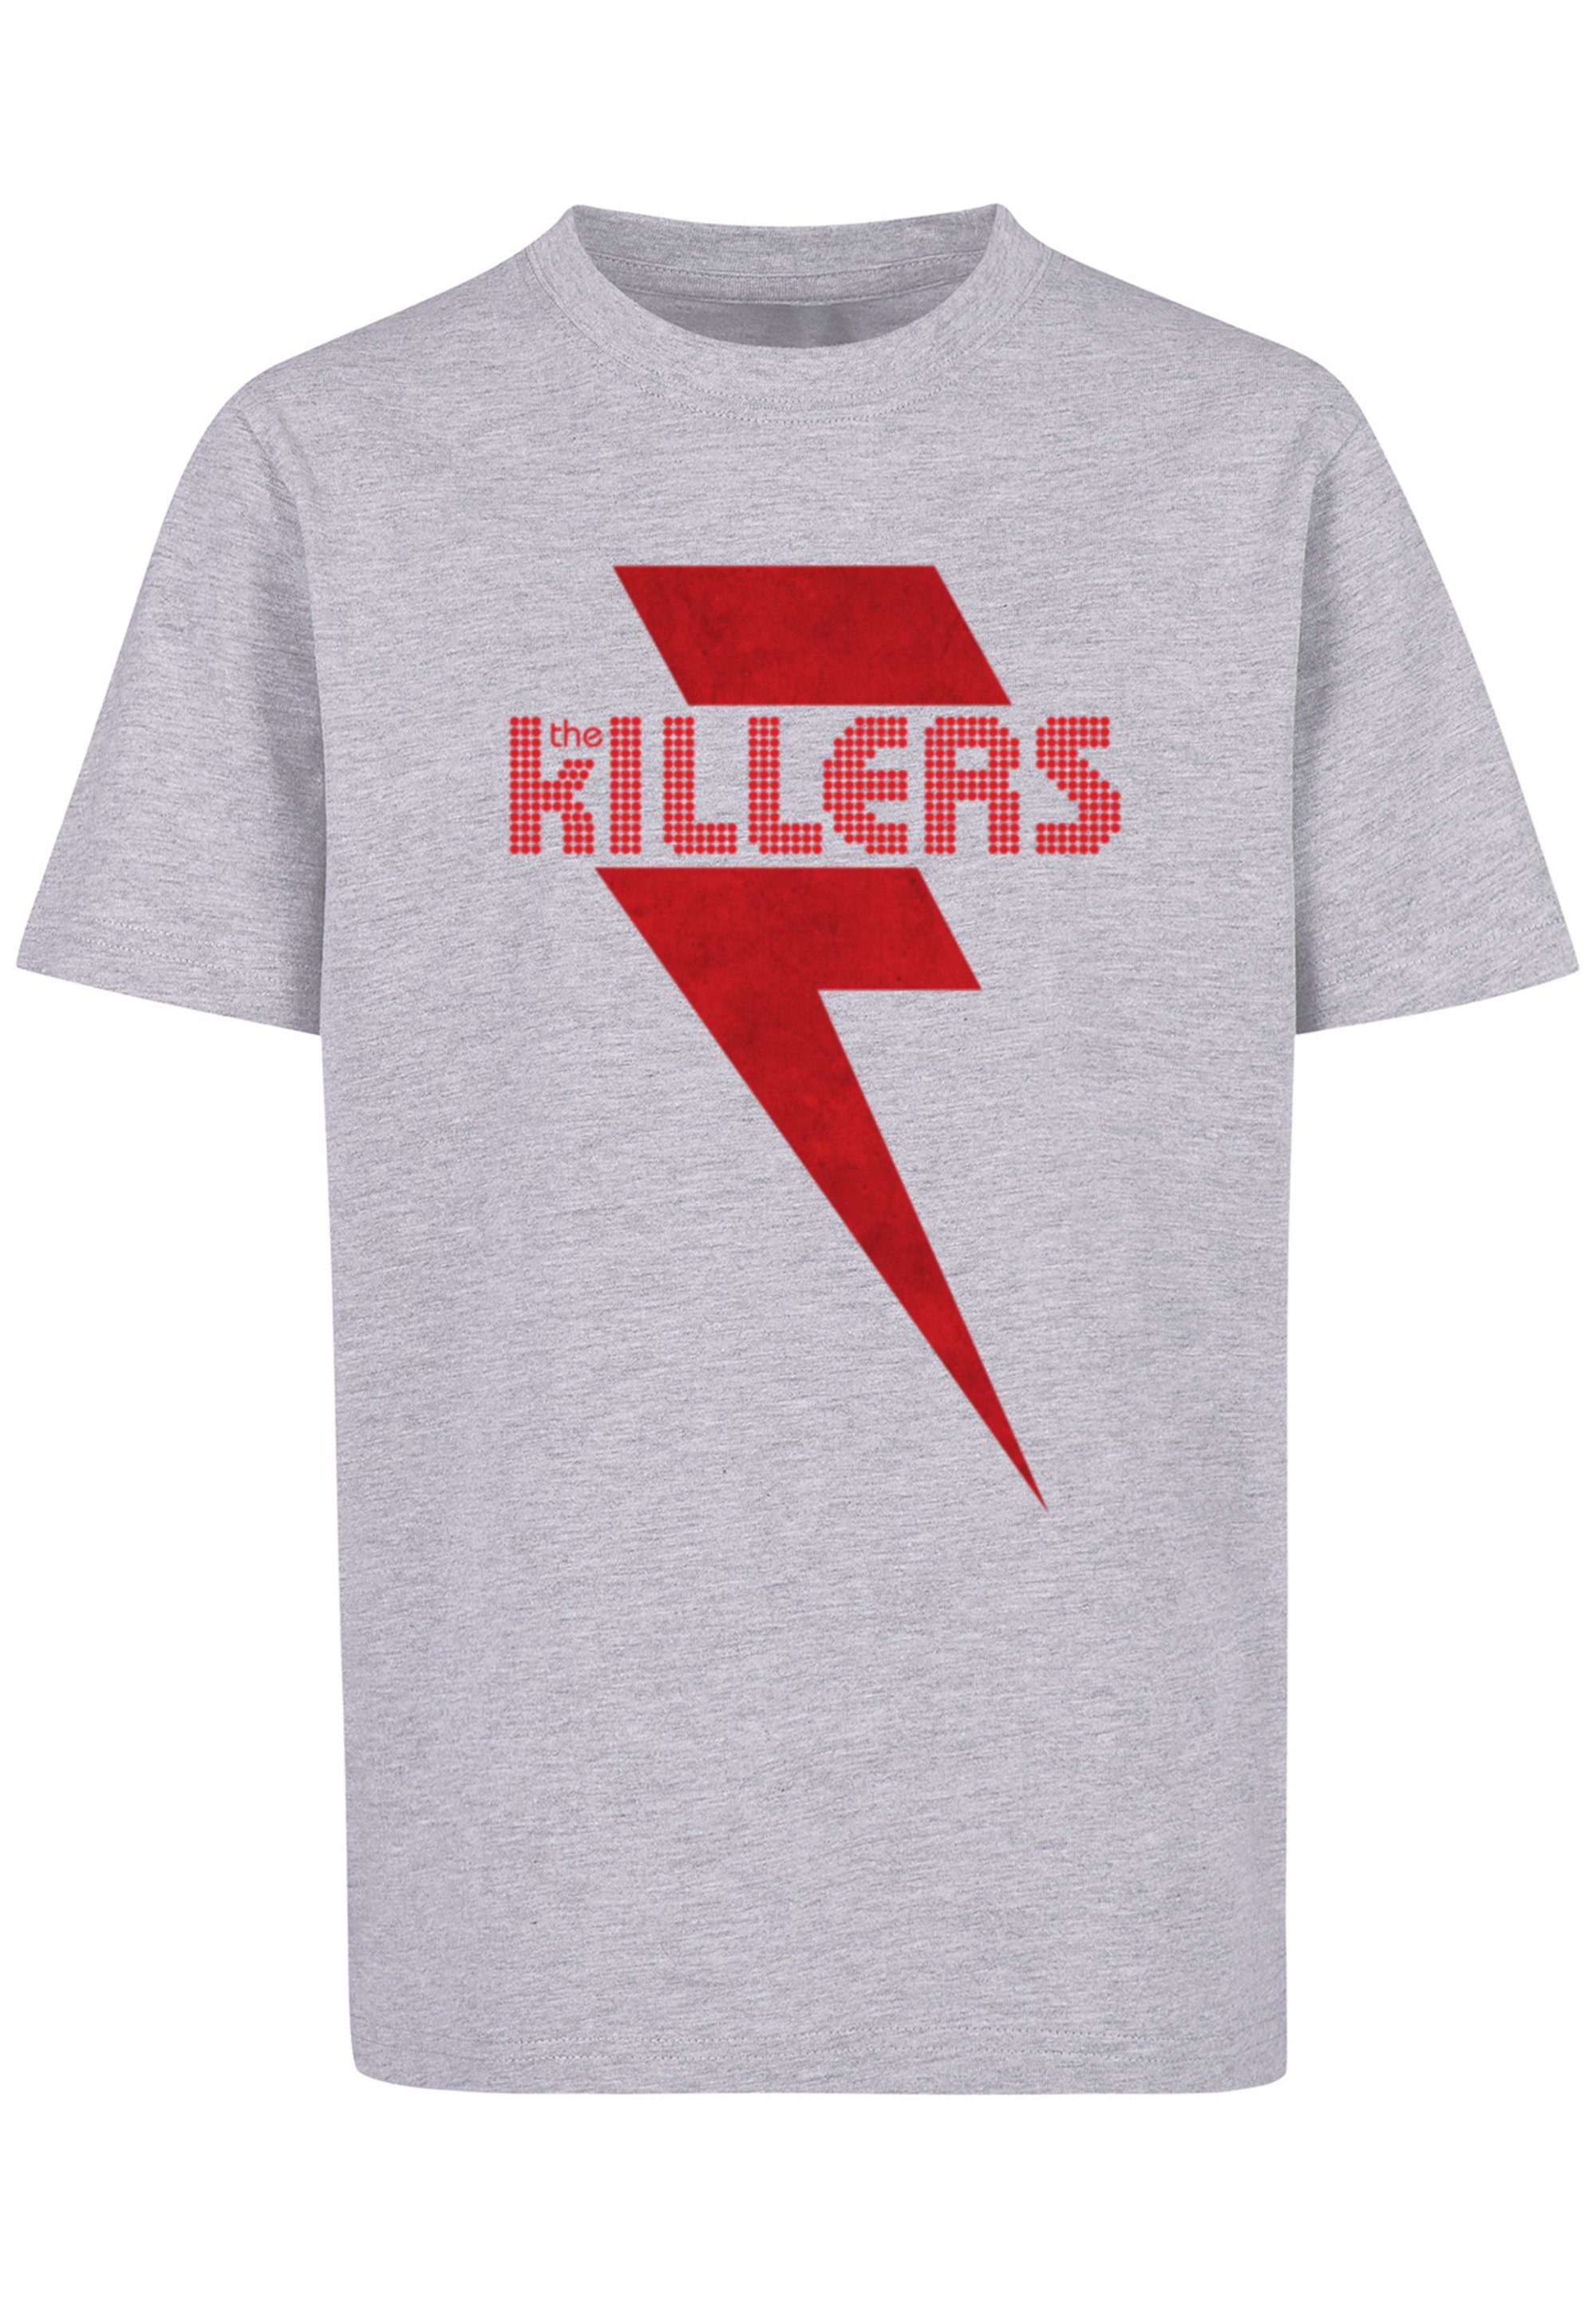 Bolt heather Killers Print The Band T-Shirt grey Red F4NT4STIC Rock